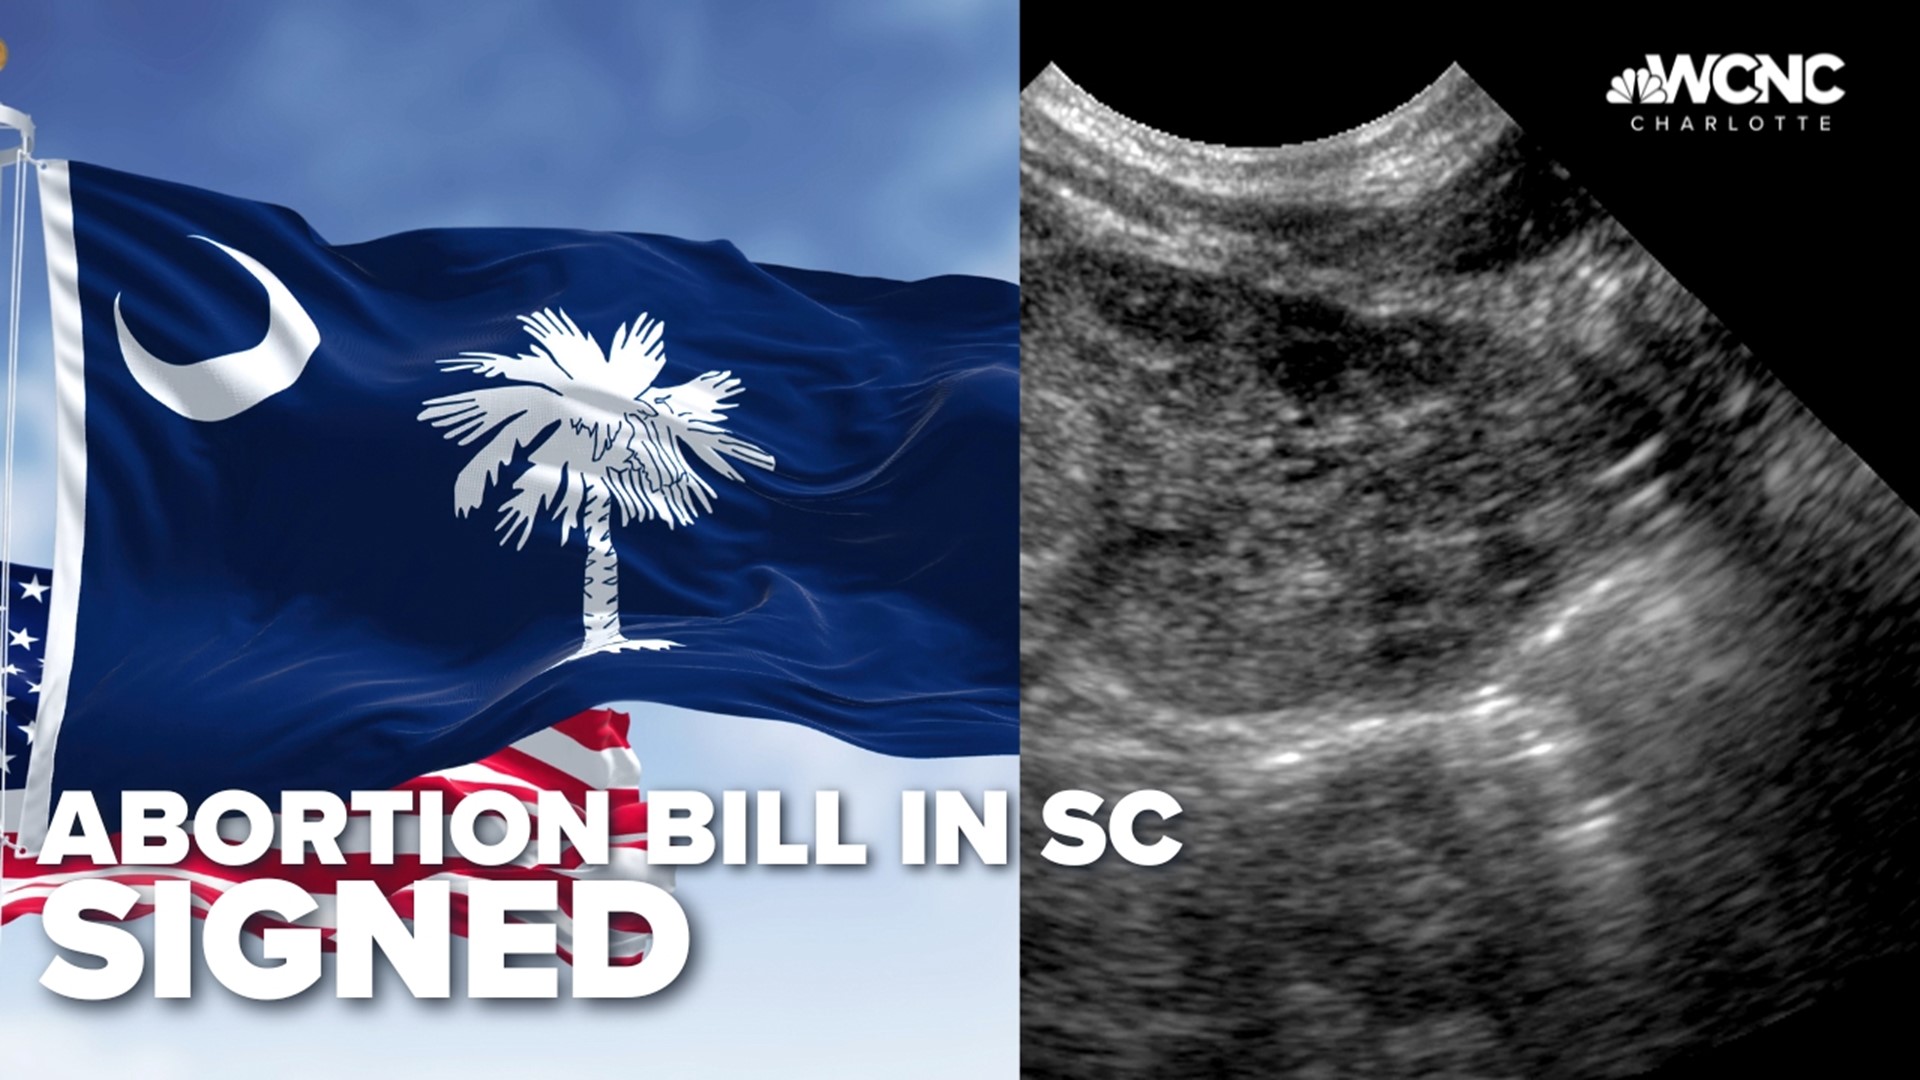 A six-week abortion ban is now in effect in South Carolina.